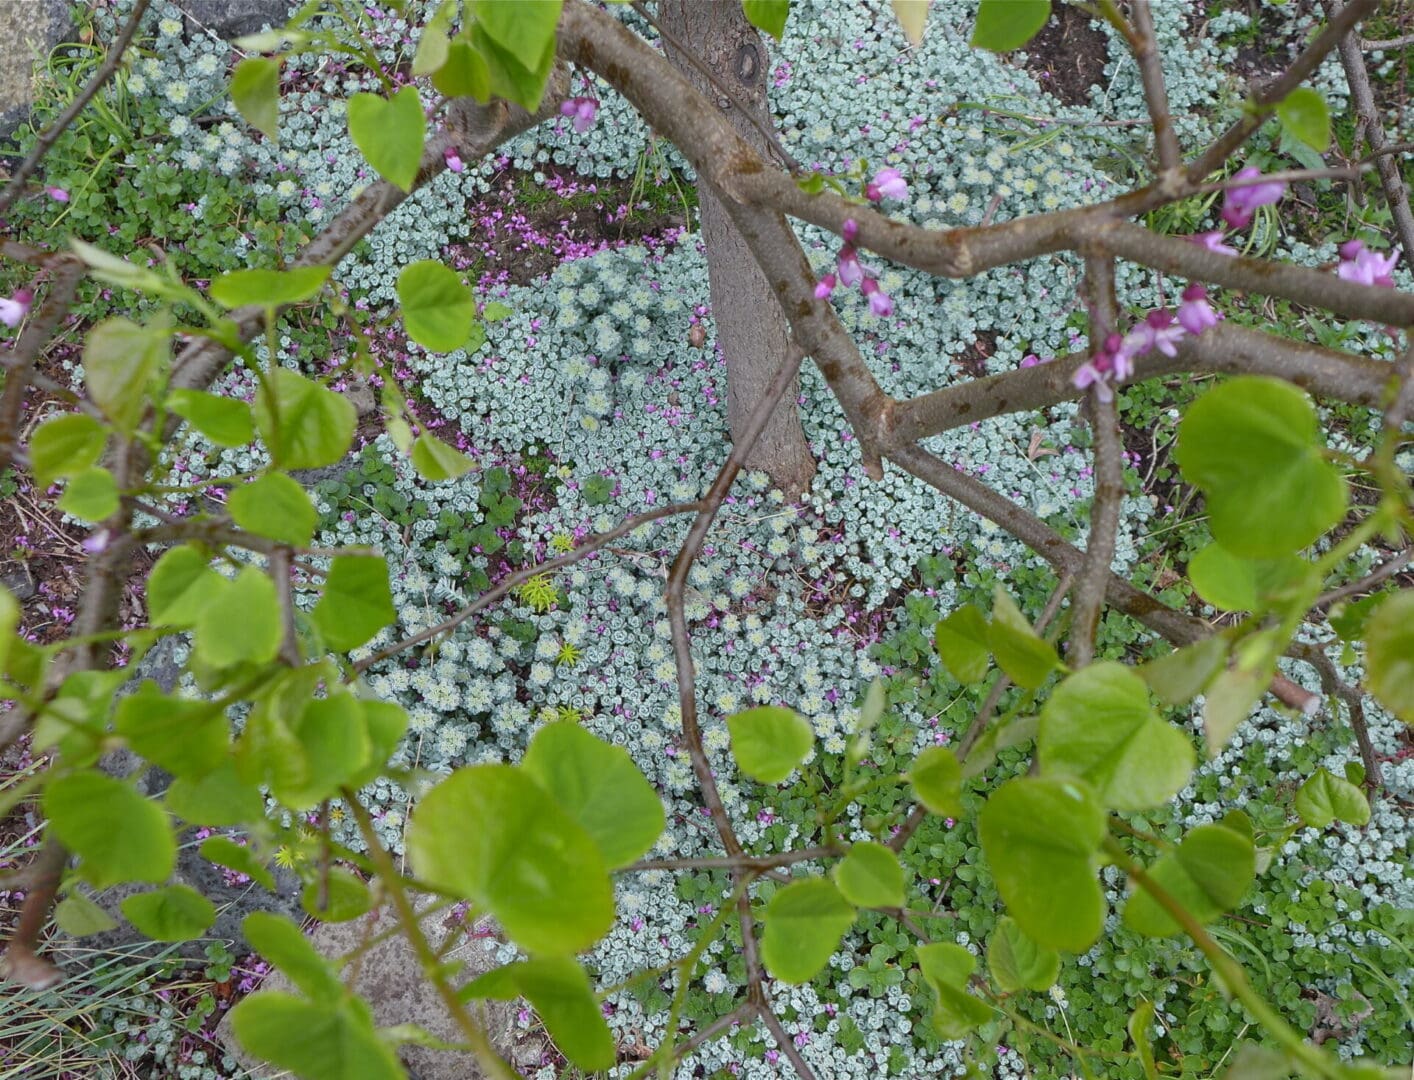 A tree with green leaves and white flowers.